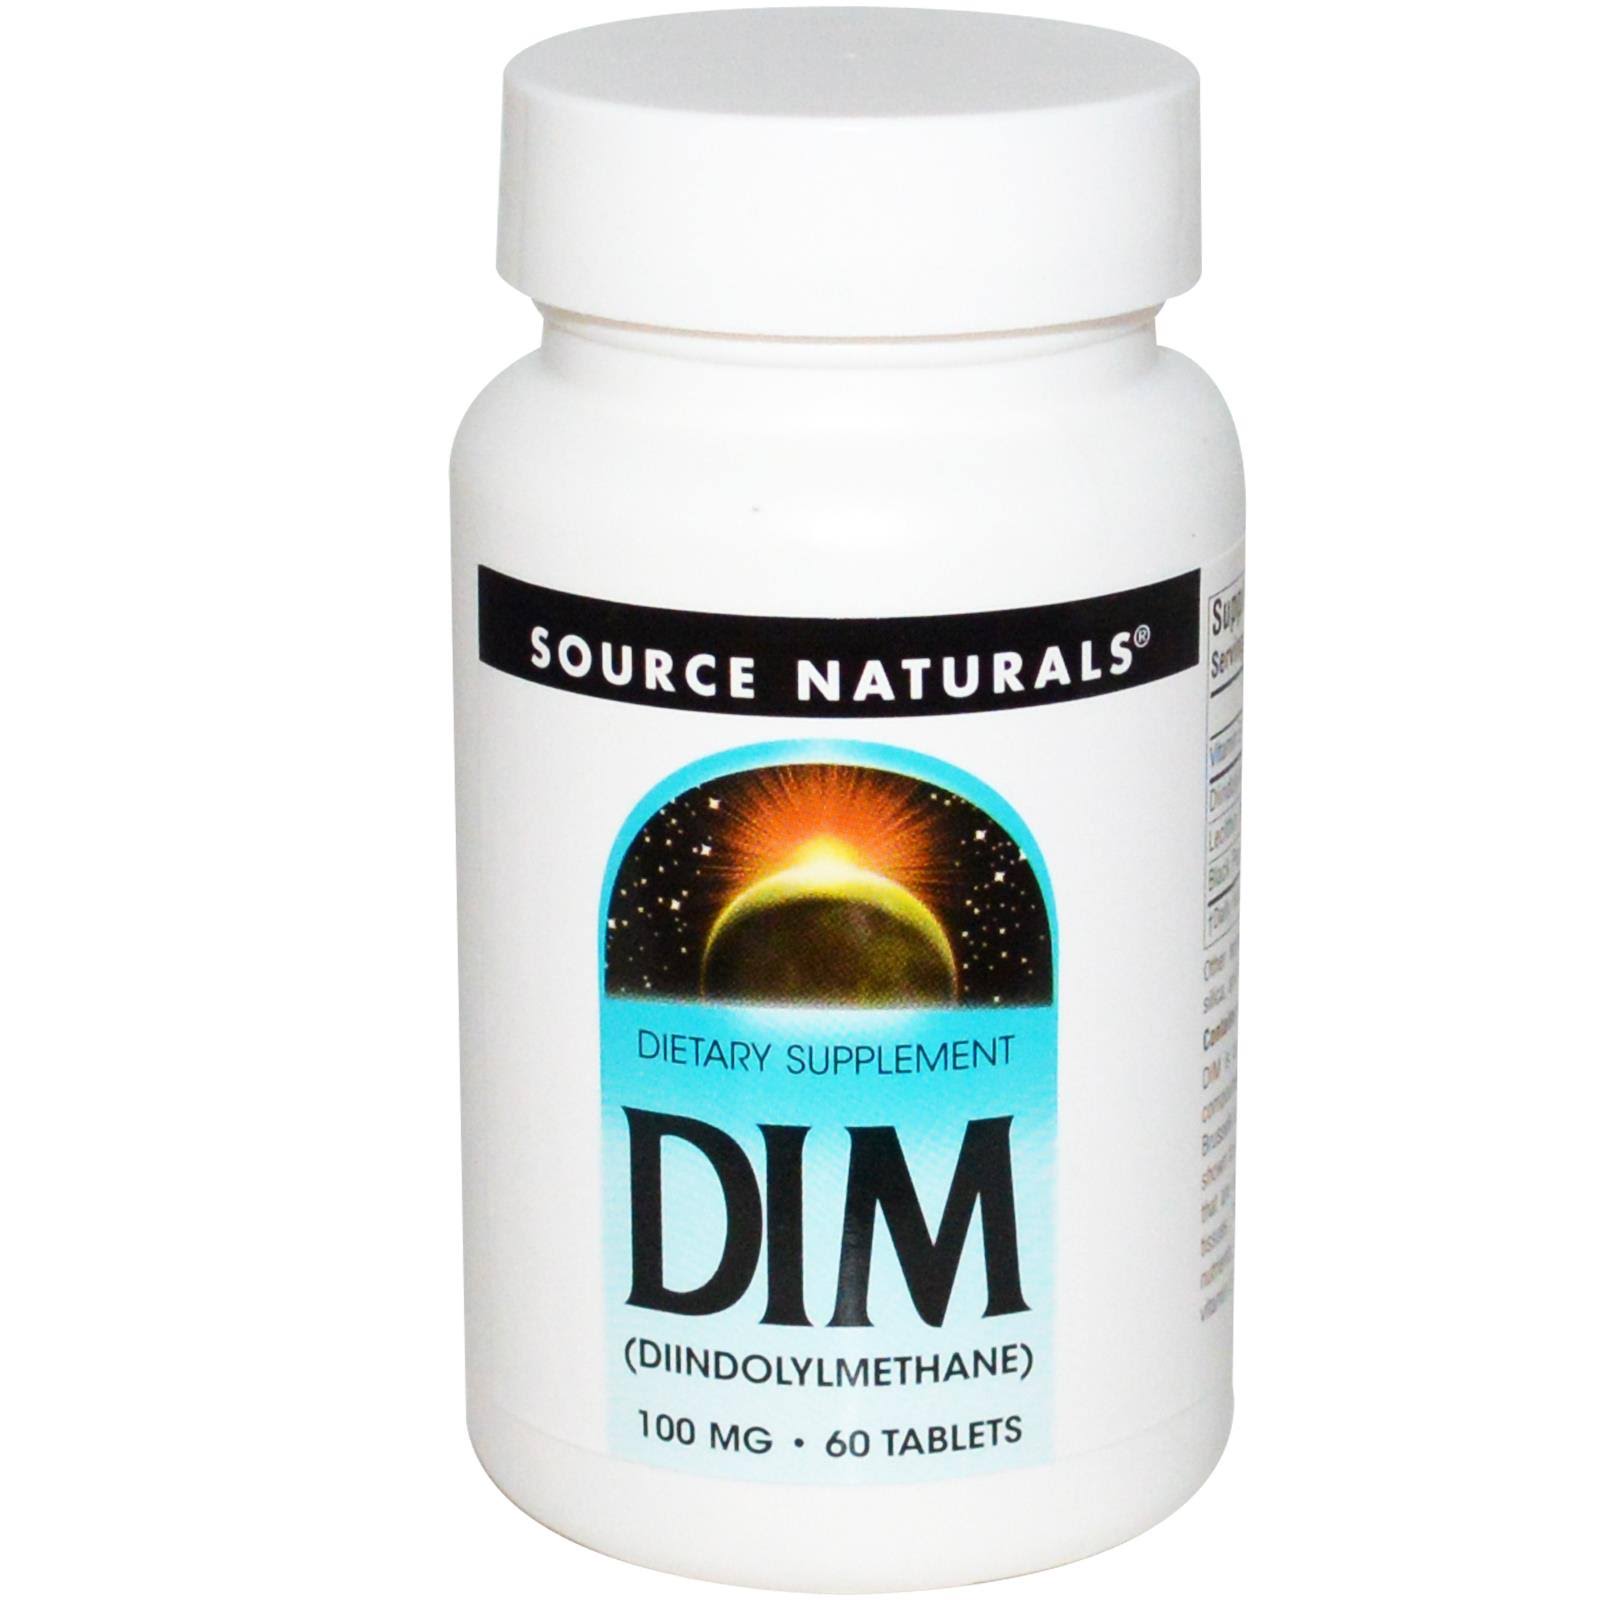 Source Naturals Dim Diindolylmethane 100mg Tablets - 60 Pack